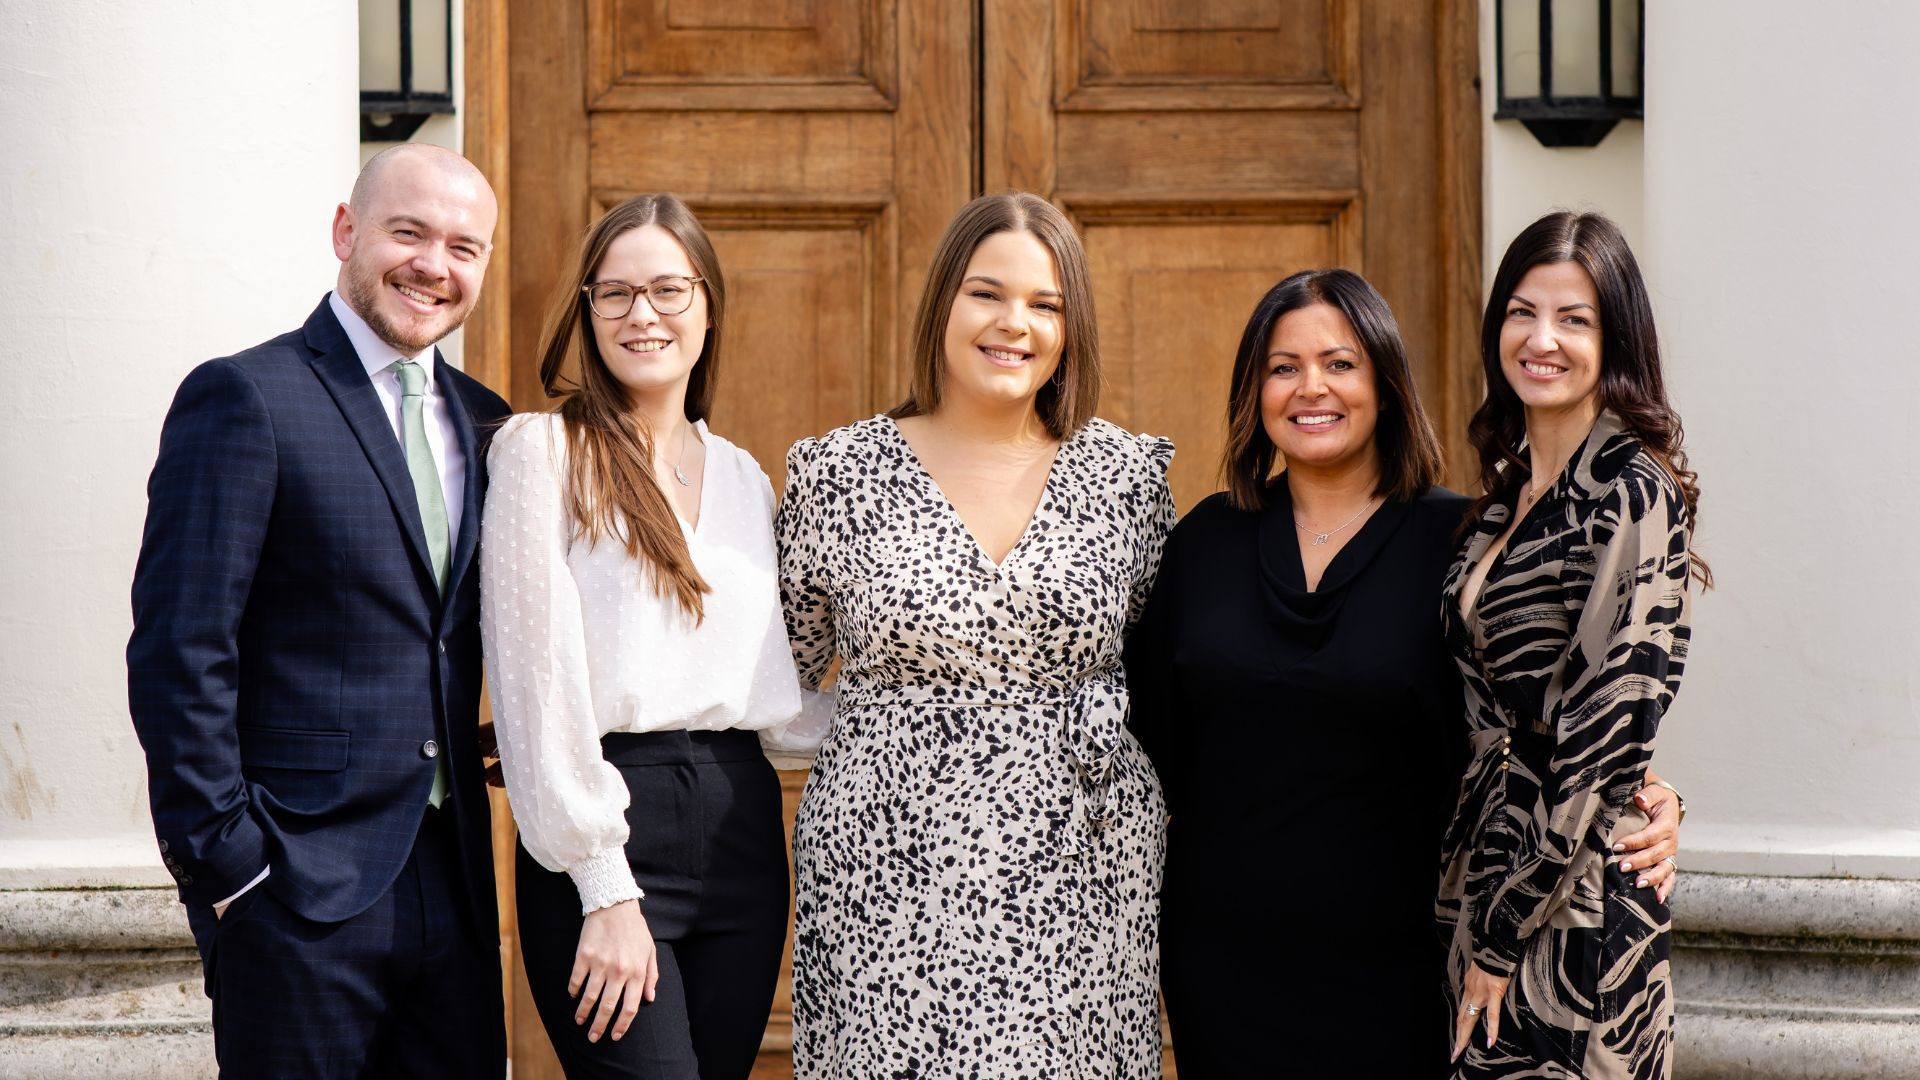 The Weddings and Events team smiling outside Hylands House. From left to right; Tom, Charlotte, Sian, Tracey, Amy.